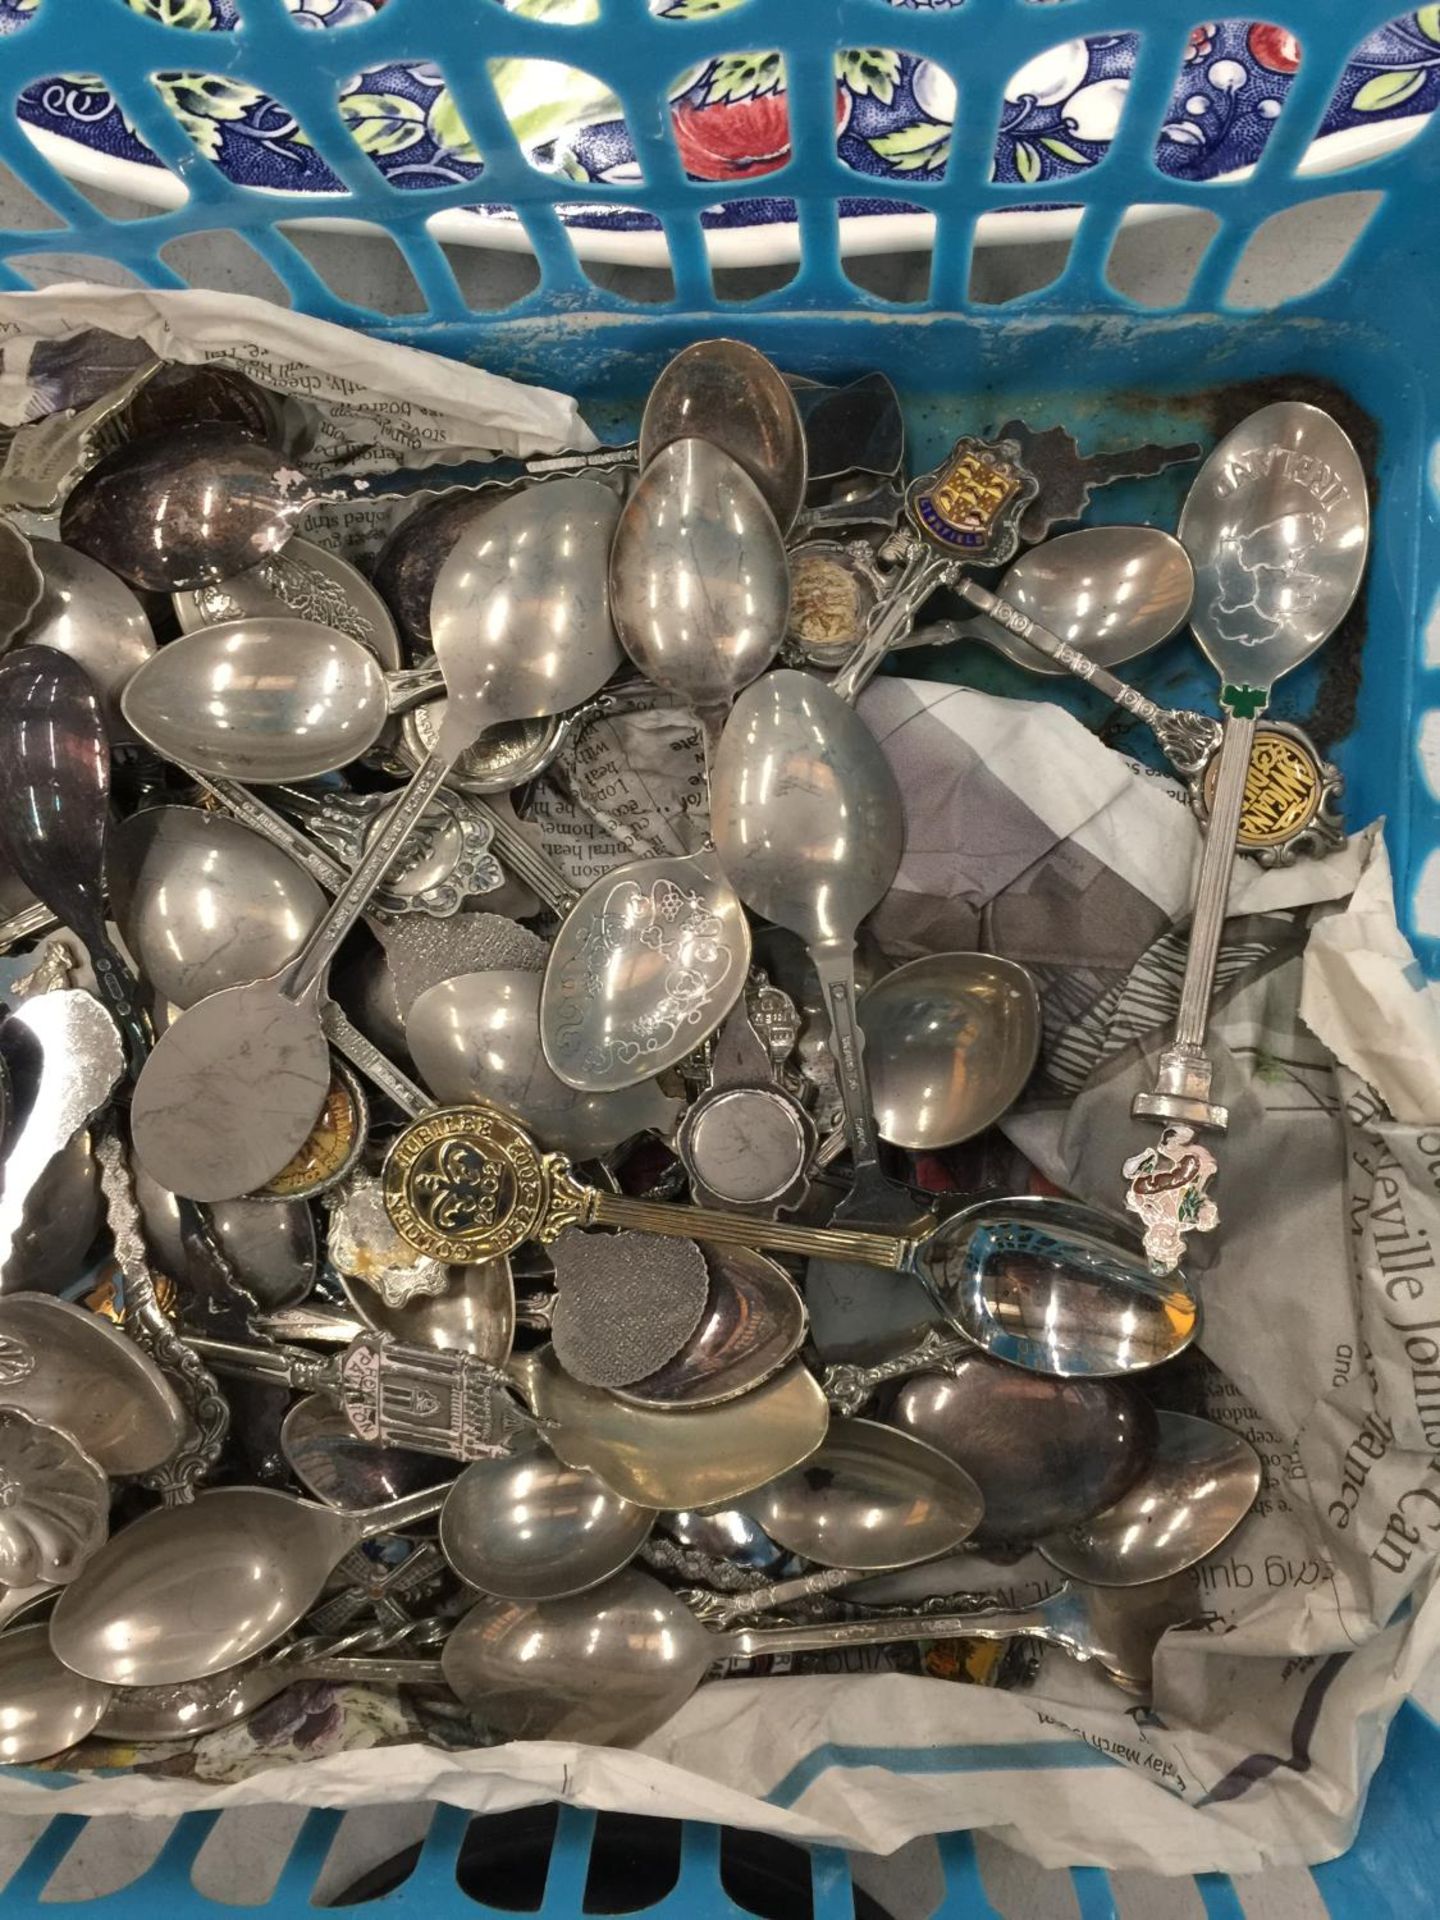 A LARGE COLLECTION OF SOUVENIR TEASPOONS - Image 3 of 3